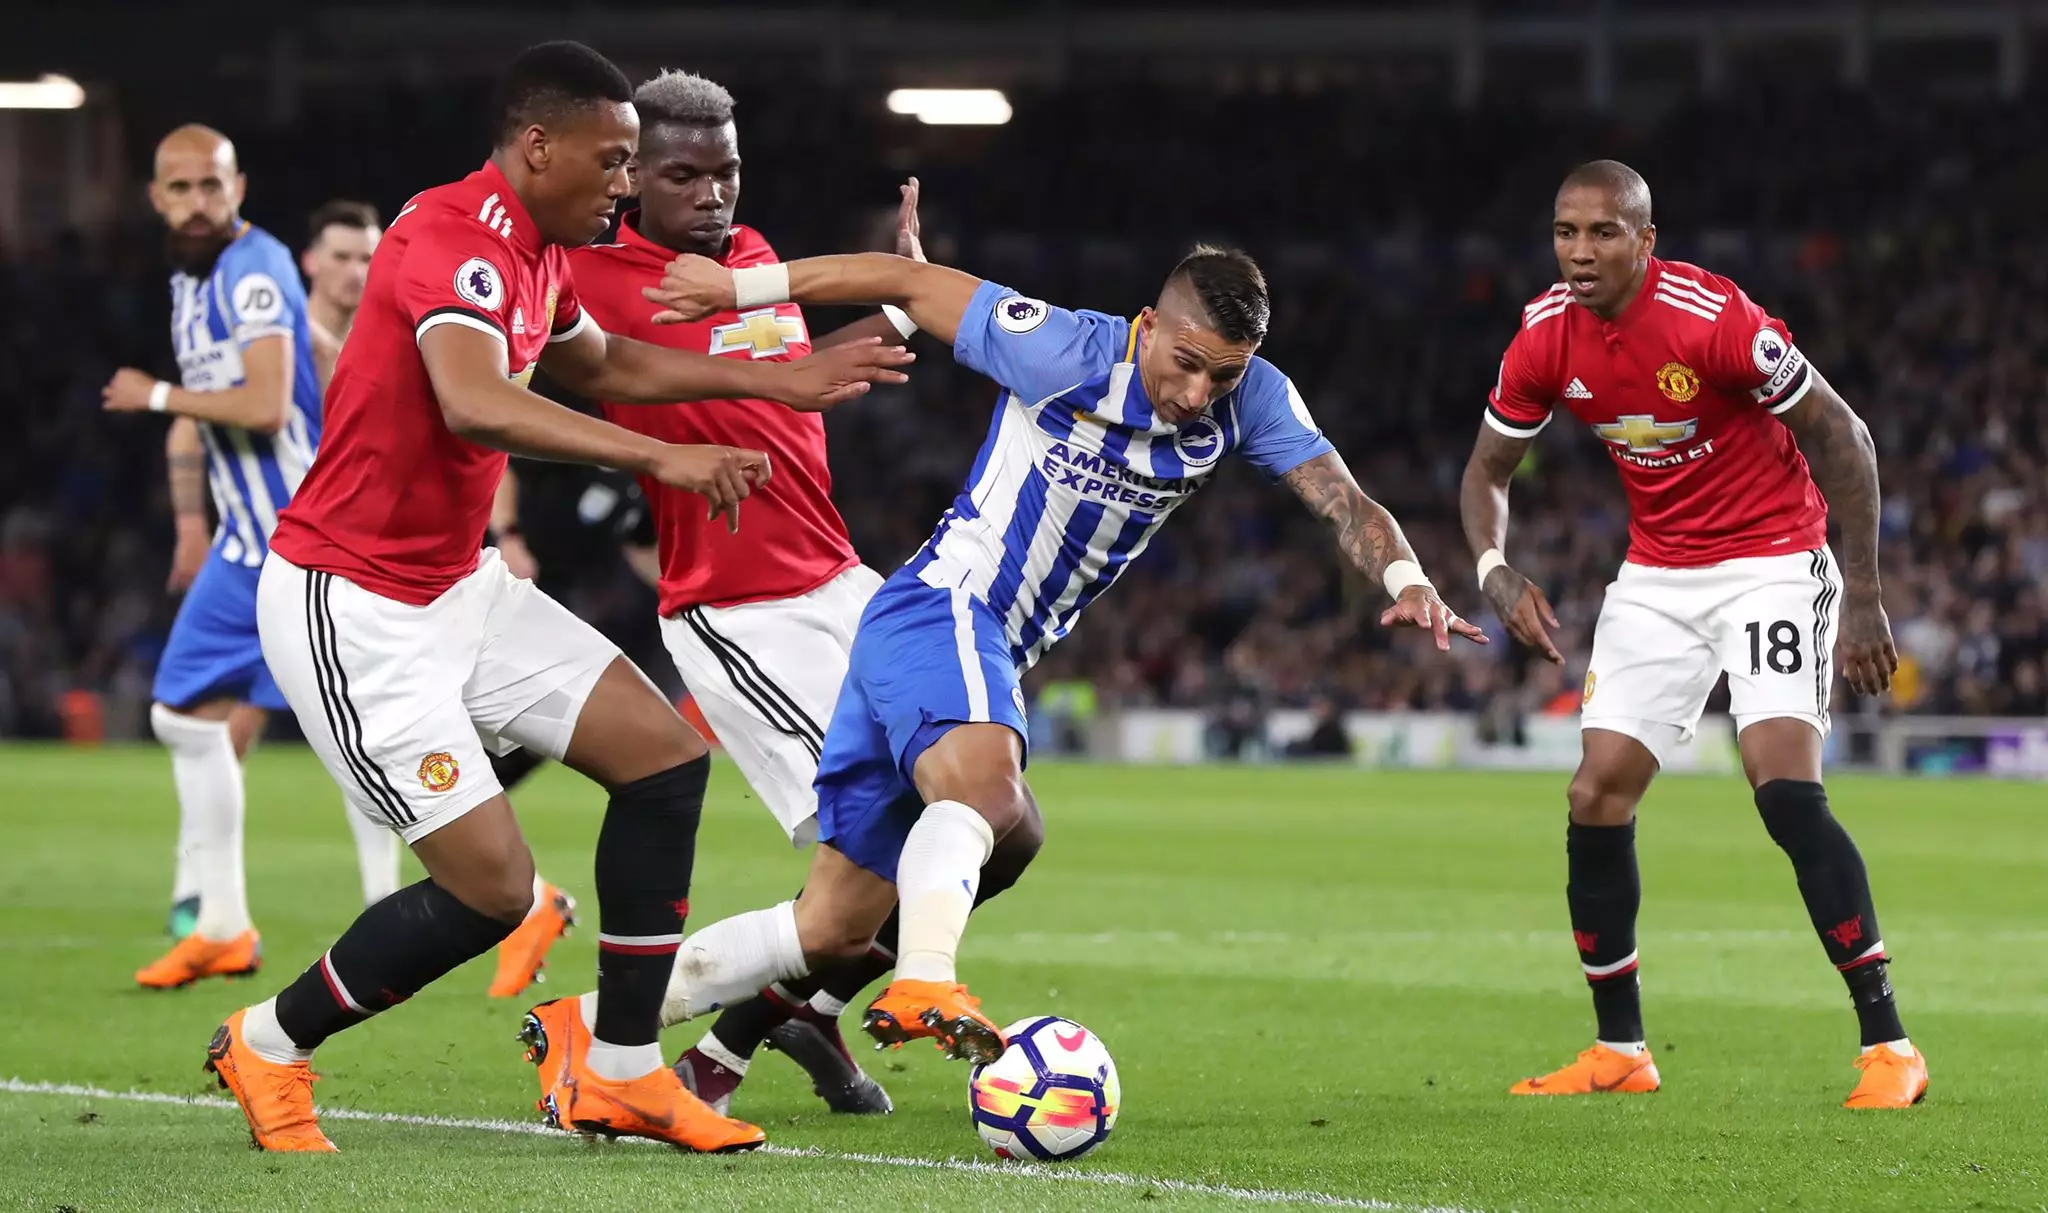 Knockaert in action against United. Image: PA